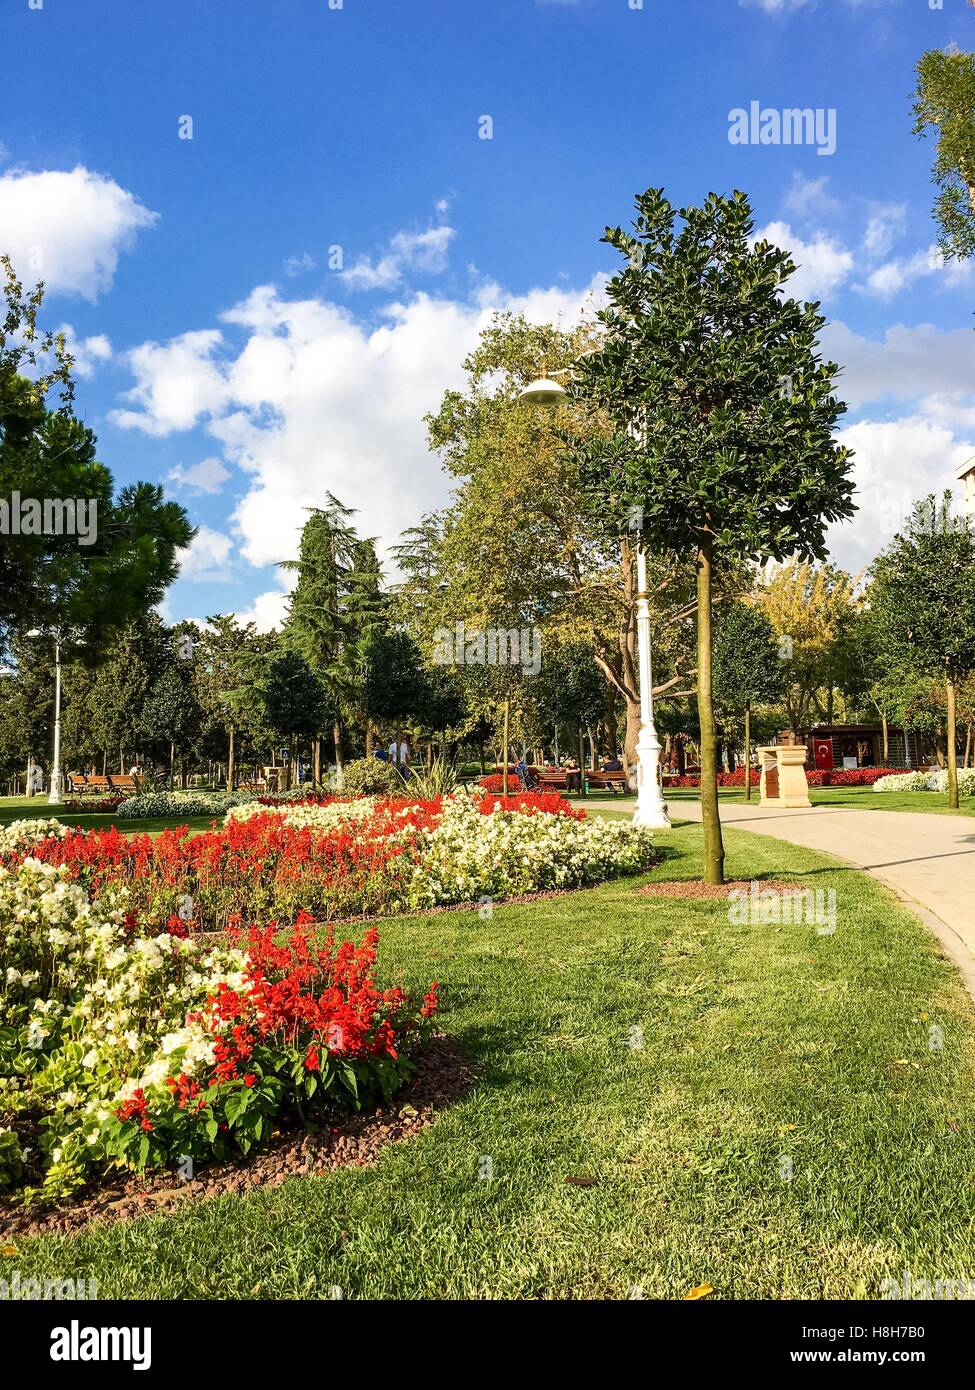 Goztepe 60th Year Park in Kadikoy, Istanbul. The park is the largest park around Bagdat Avenue and consist of many pools and child parks, many types o Stock Photo